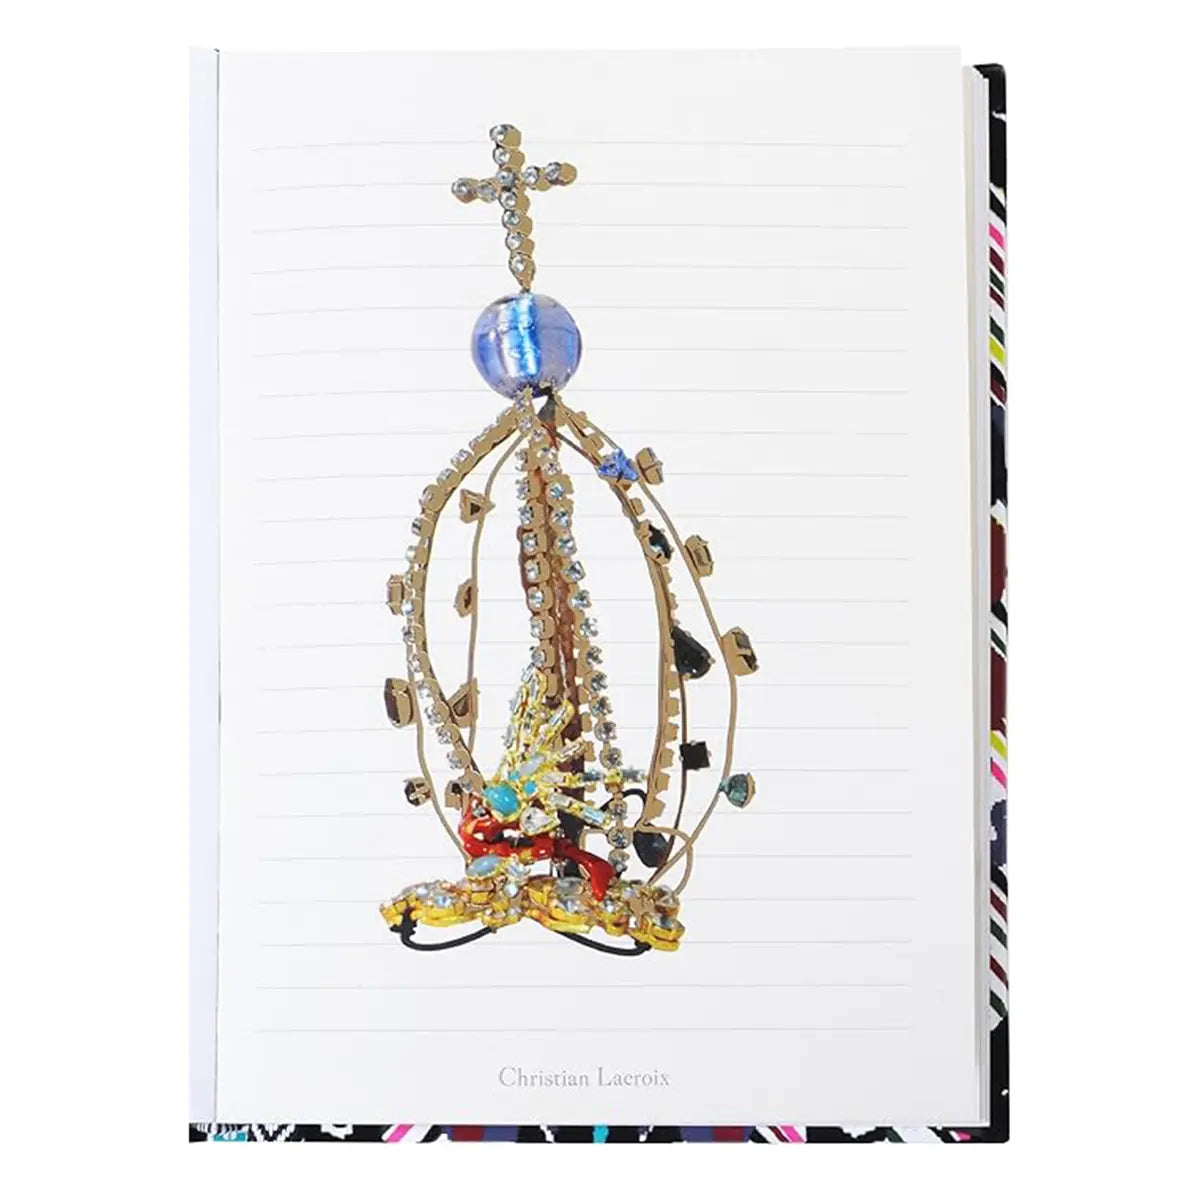 Ruled page of Hachette Christian Lacroix Cordoba Medium Journal with crown designs